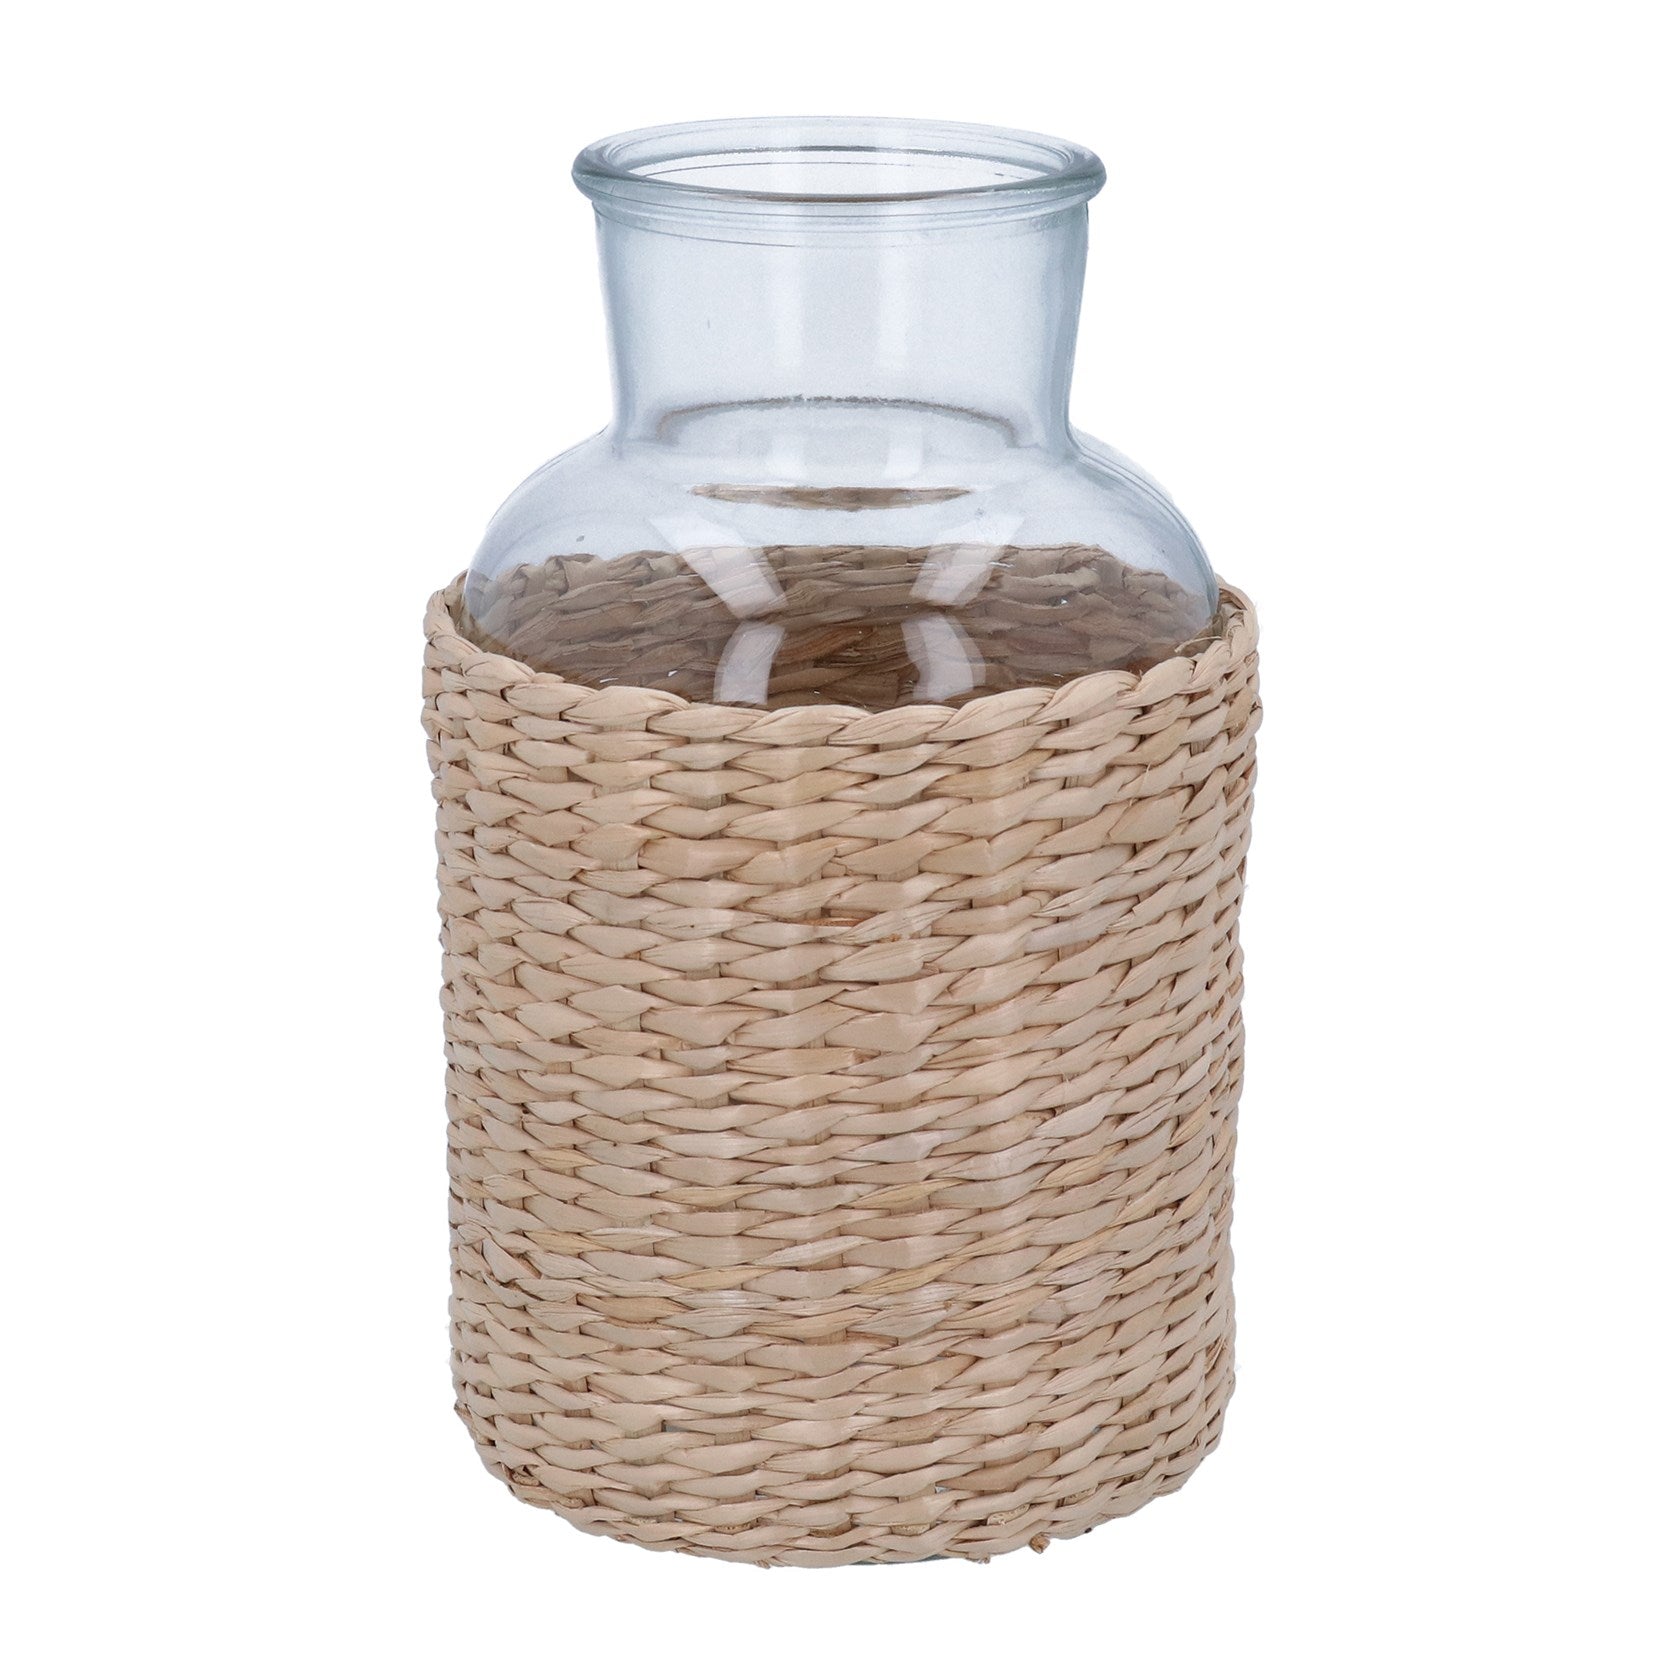 Glass Vase with Rattan Cover - Large